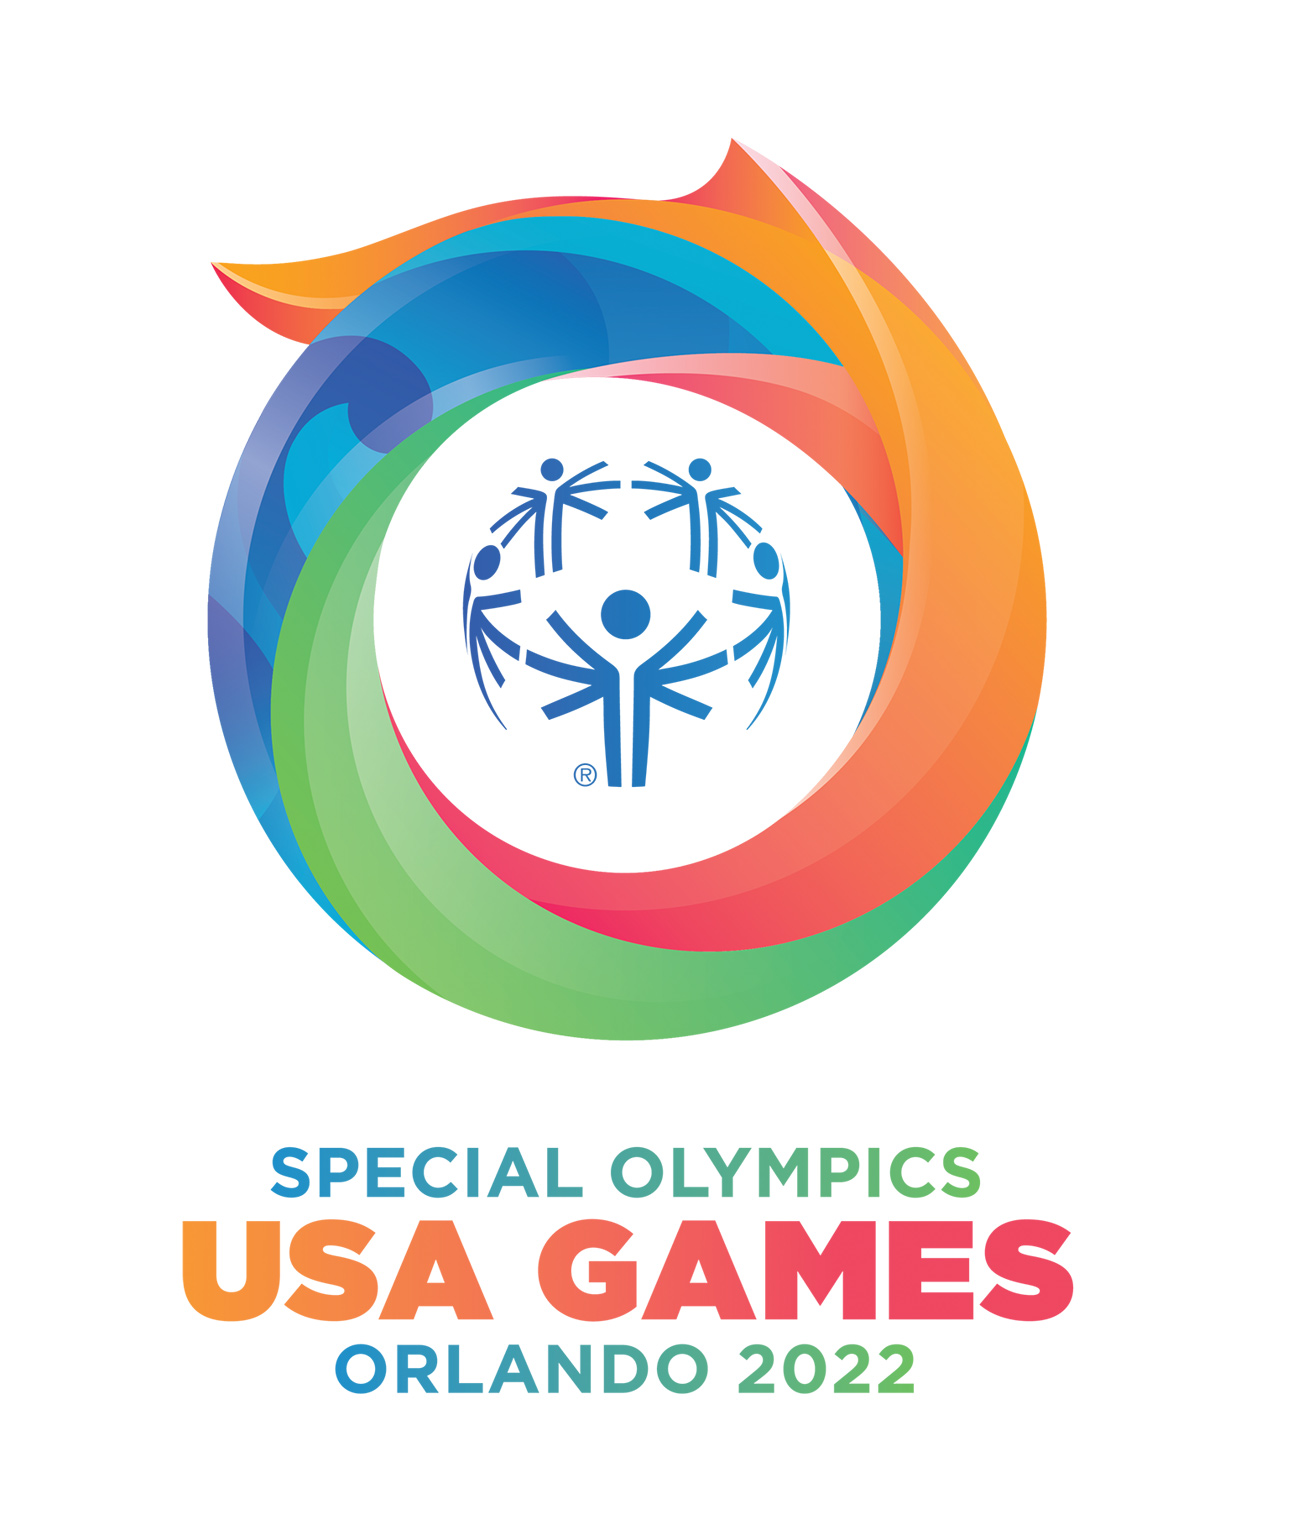 2022 Special Olympics USA Games Logo, an inspiration to society